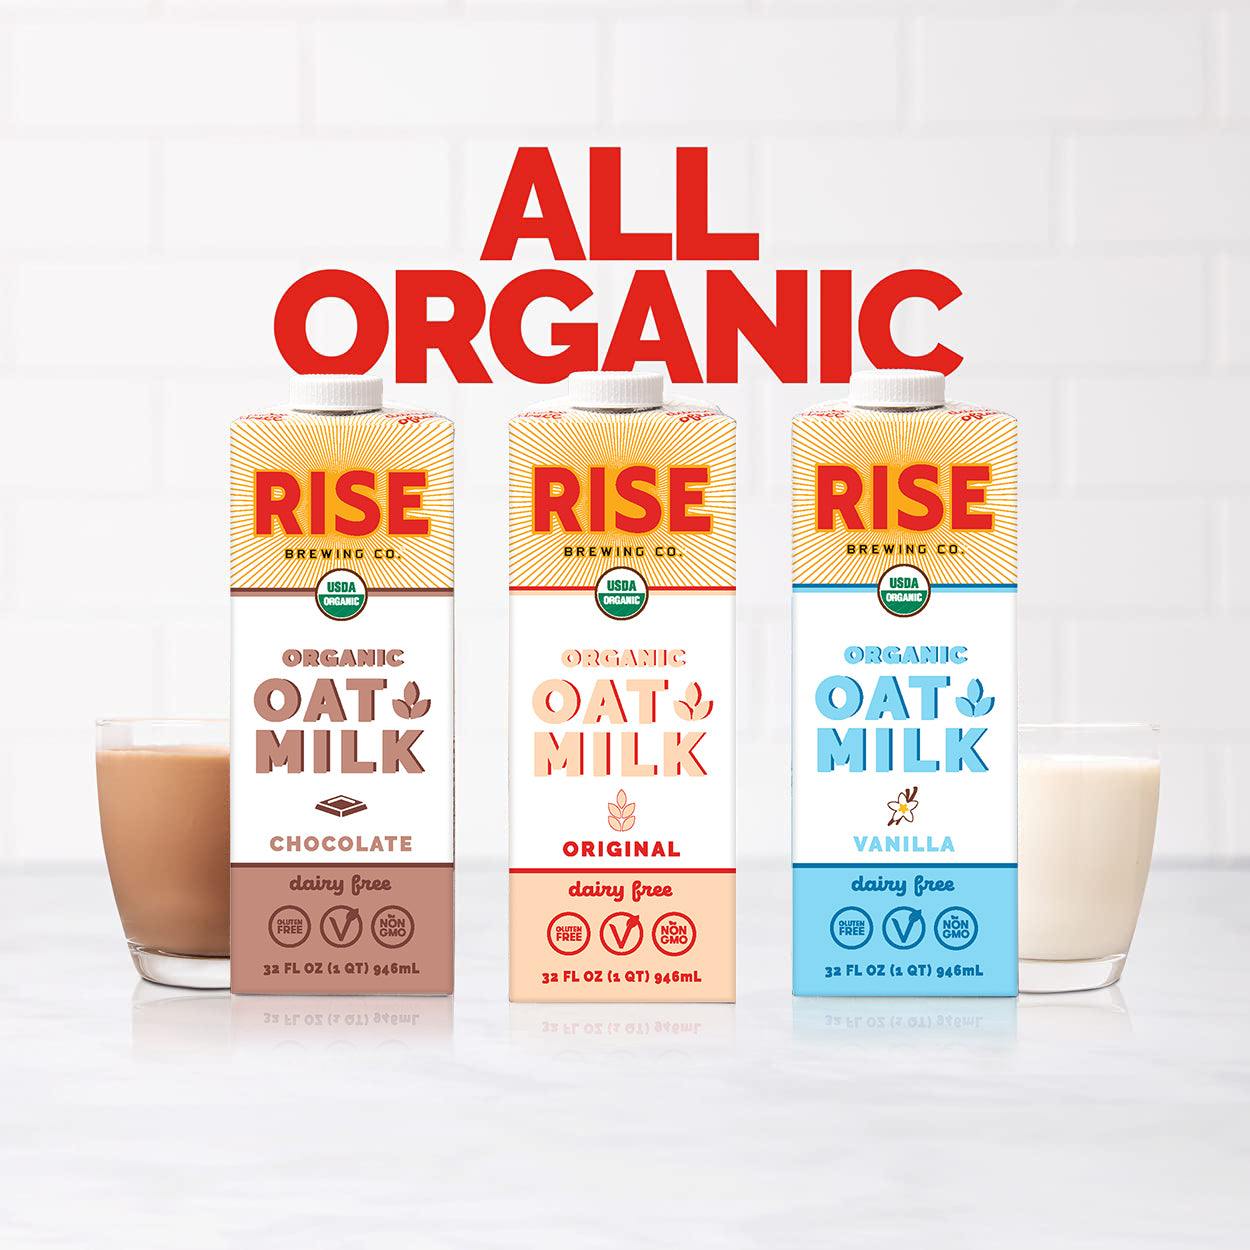 All Organic RISE Brewing Co. Oat Milk Variety Pack